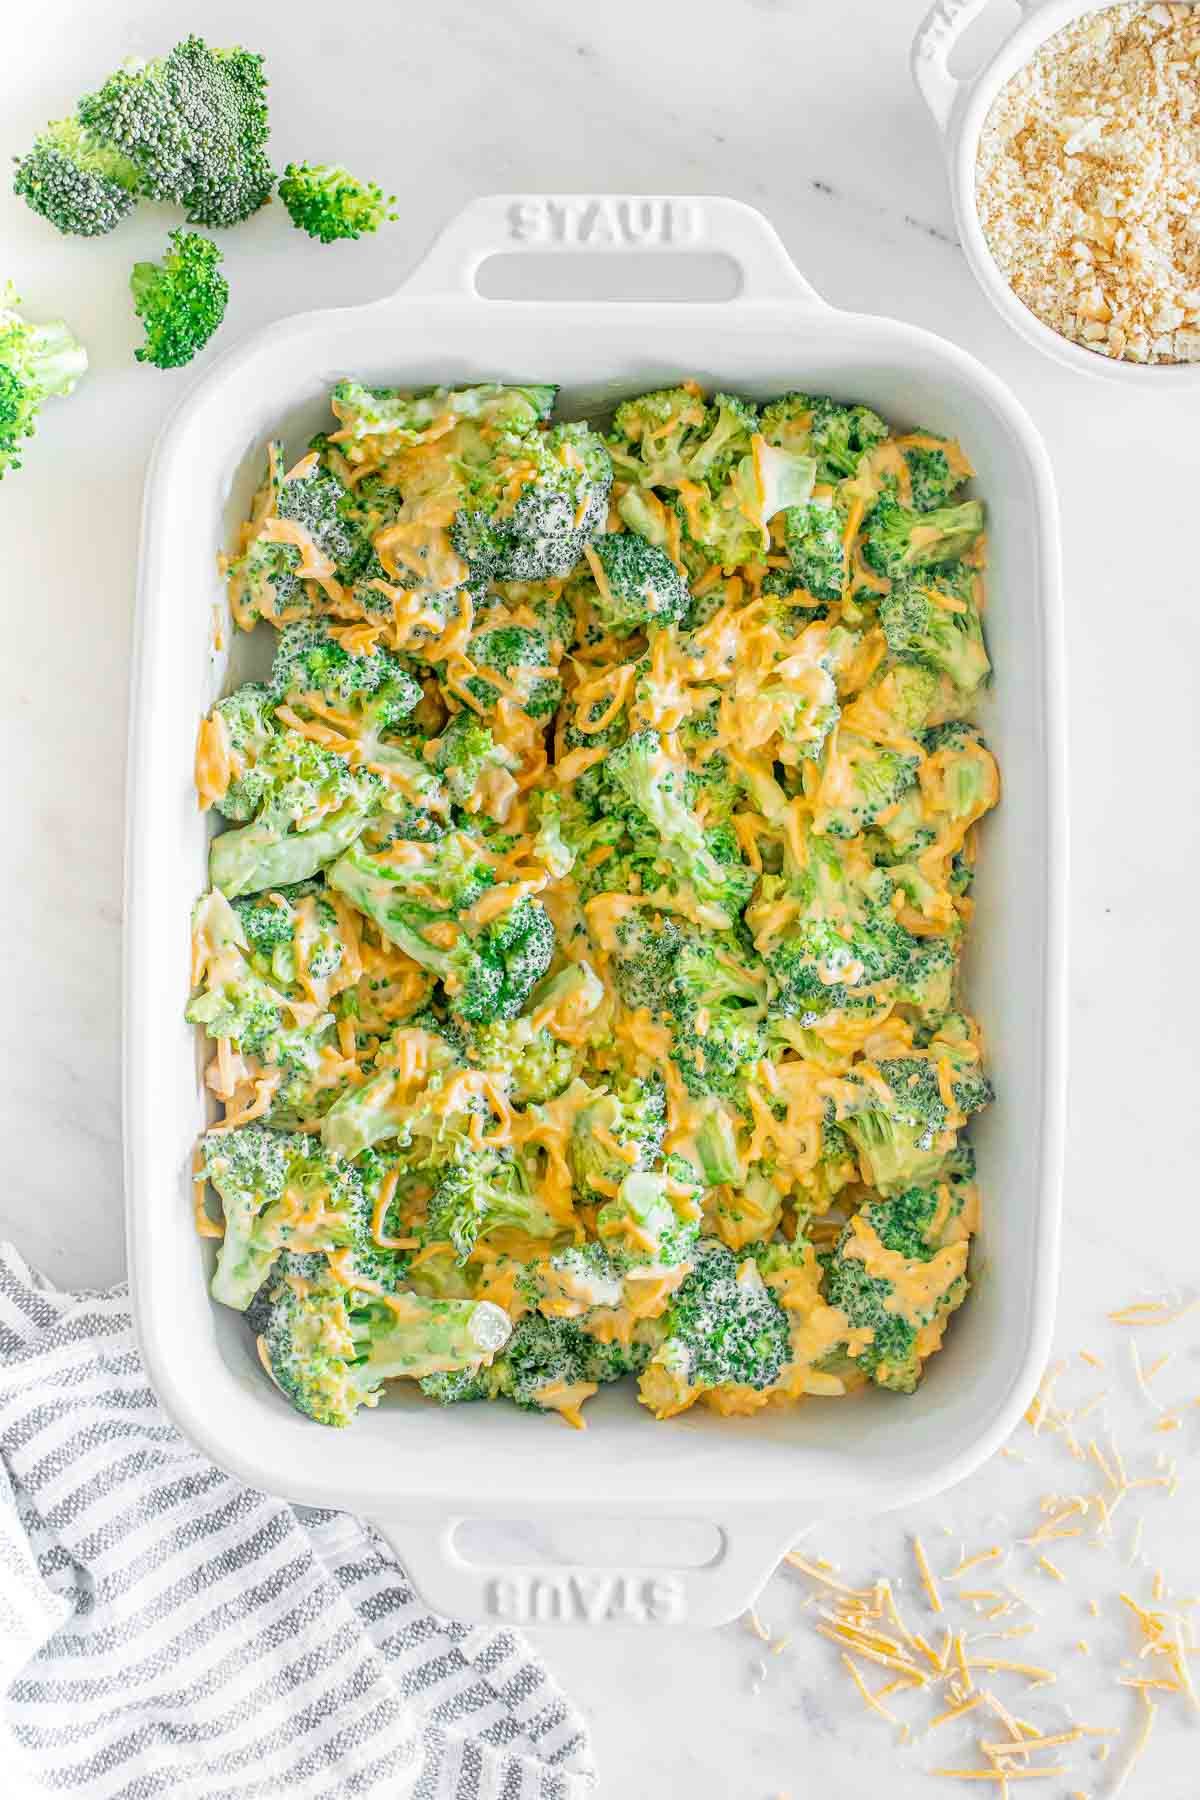 Broccoli and cheese casserole in a white baking dish.